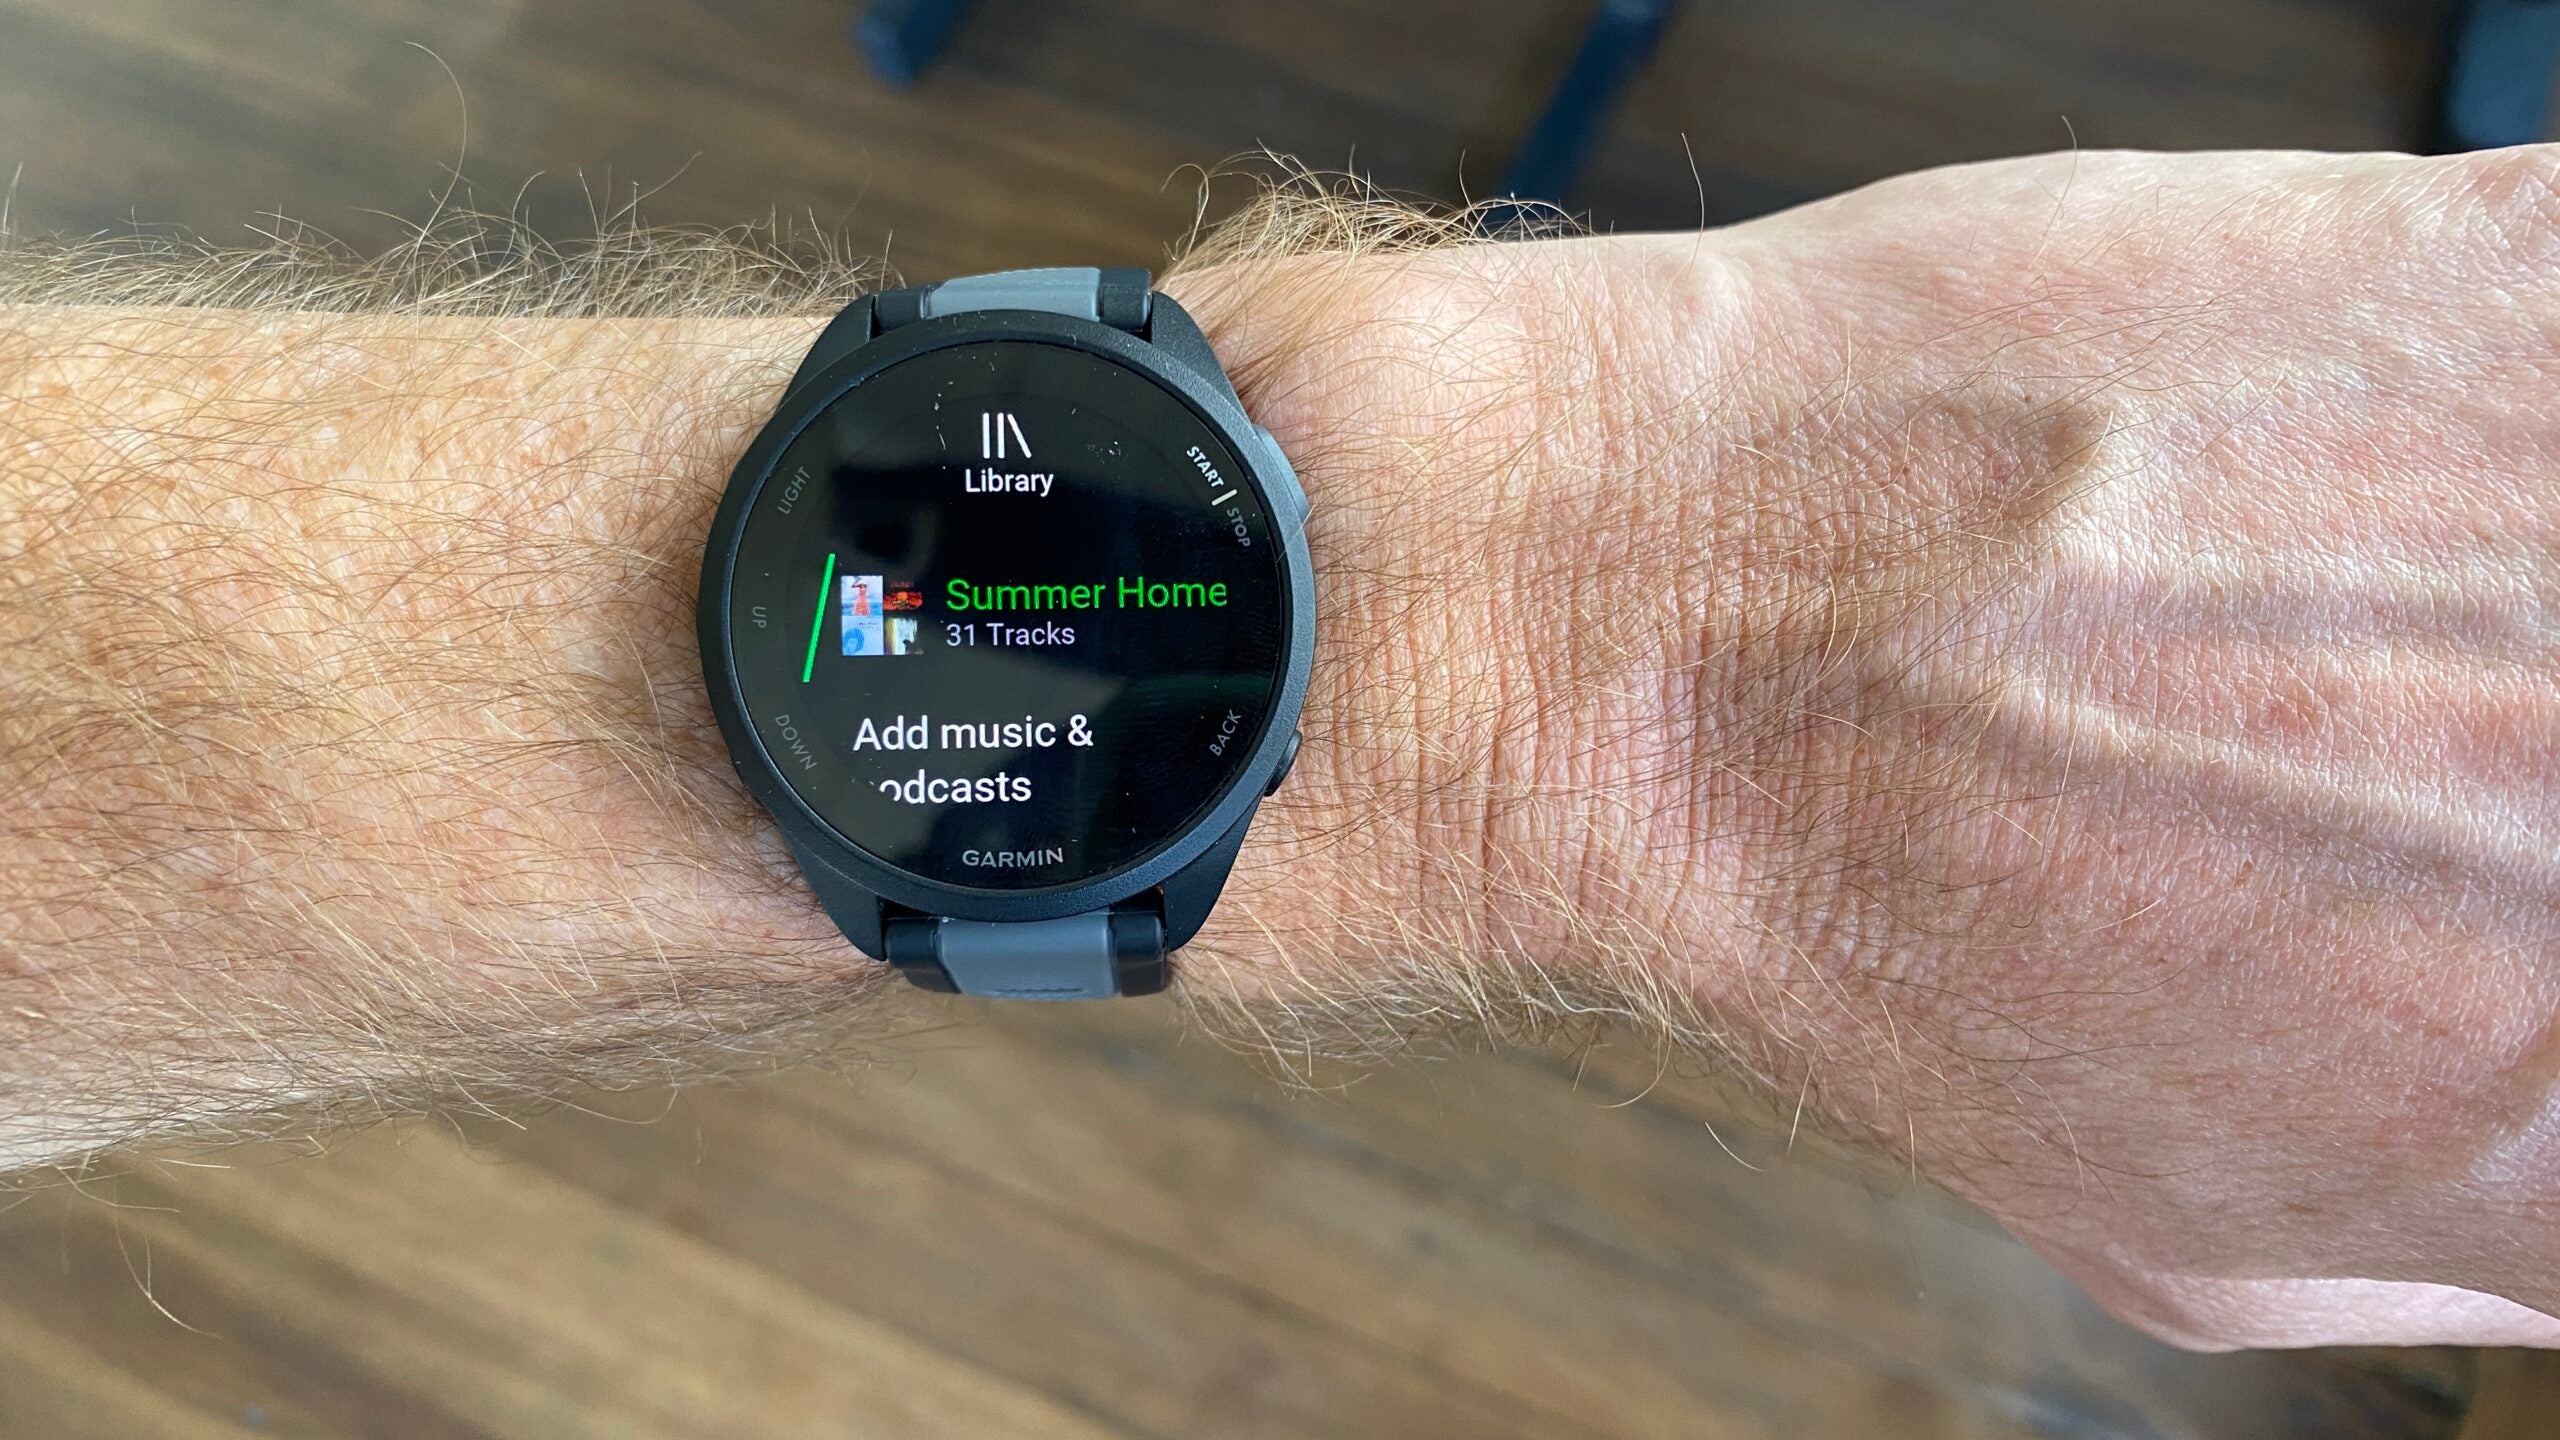 The Garmin Forerunner 165 Music runs $300 and plays .mp3s to connected Bluetooth headphones as well as onboard downloads from Spotify, Amazon Music, and Deezer.